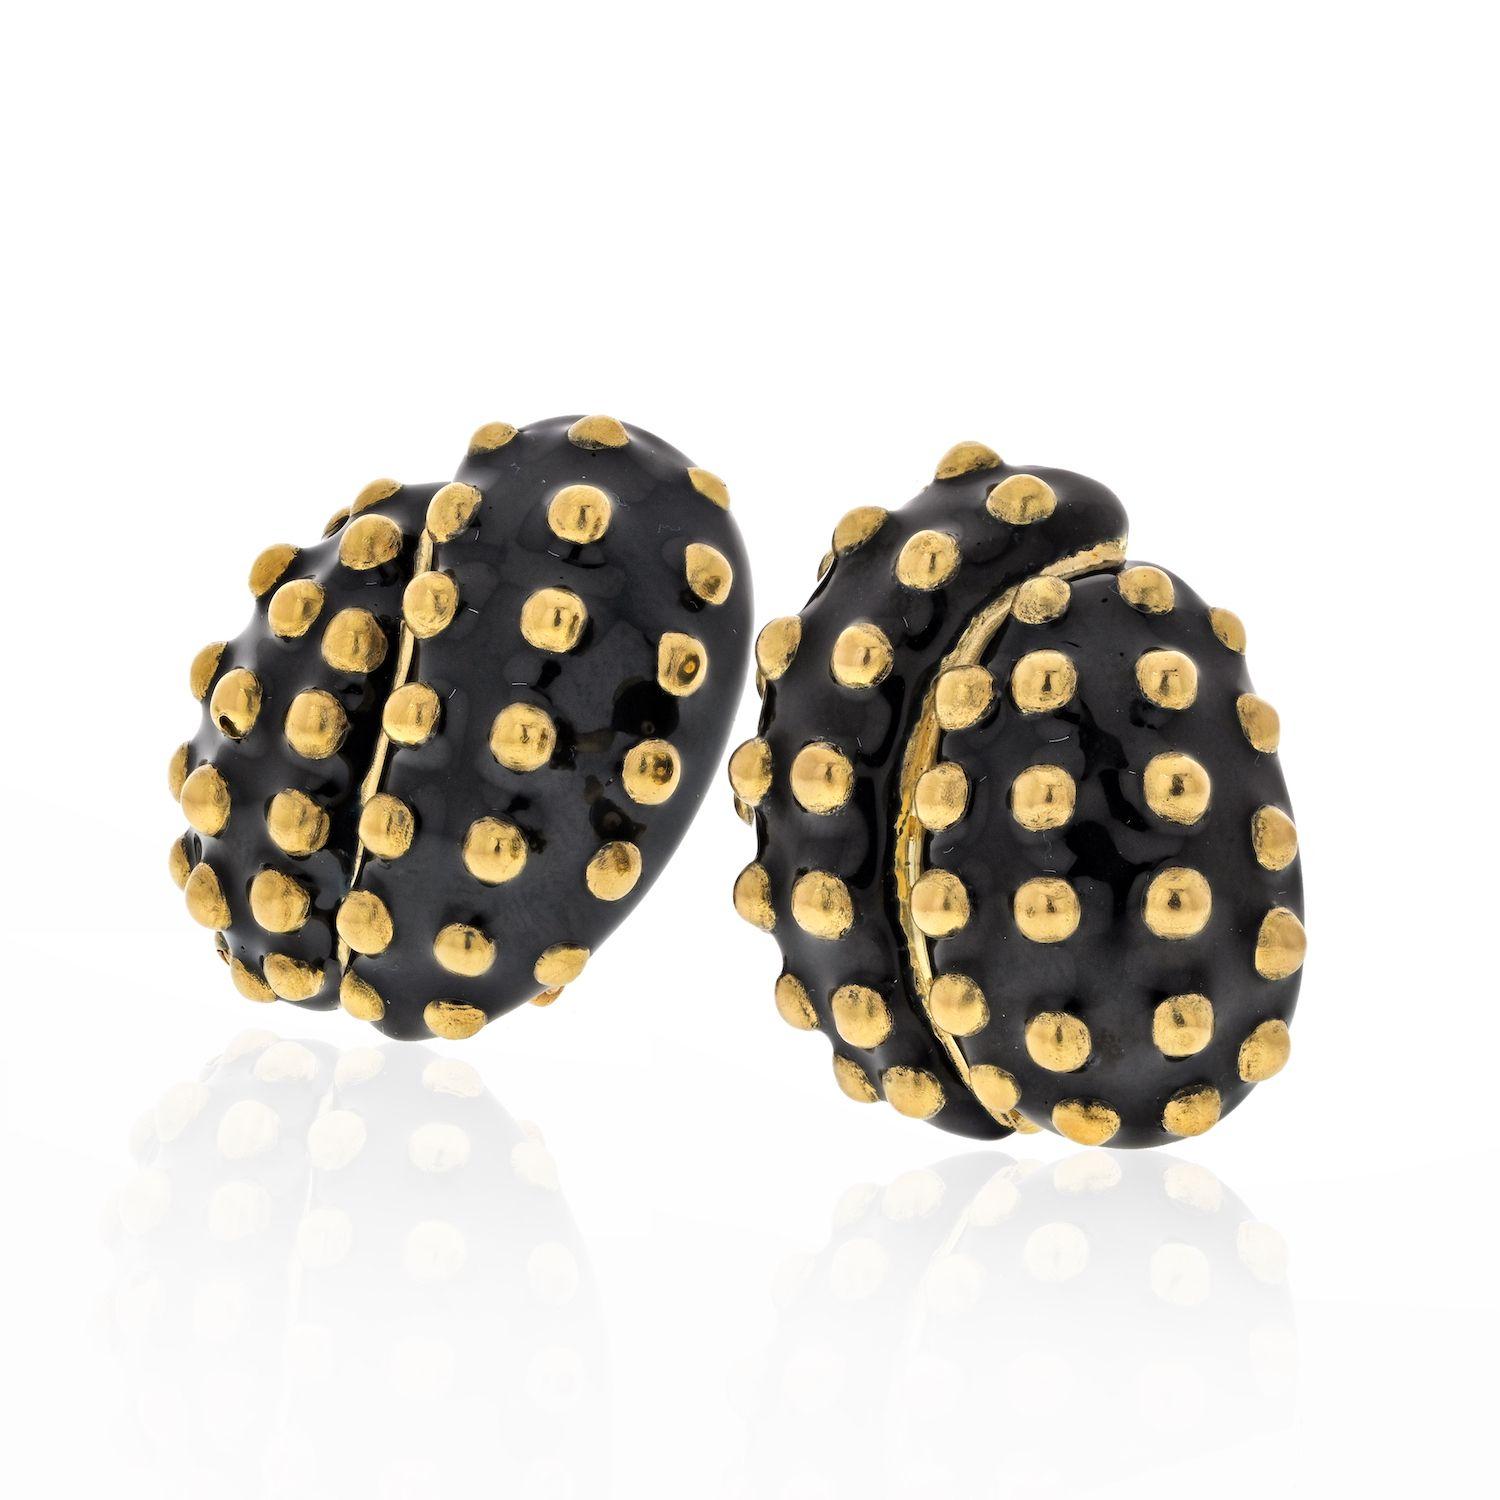 A unique pair of 18k yellow gold, black enamel, gold studded clip earrings by David Webb. The earrings feature bead bubble gold studs applied all around the surface of black enameling. The earrings measure 27mm in height and 22mm in width and have a